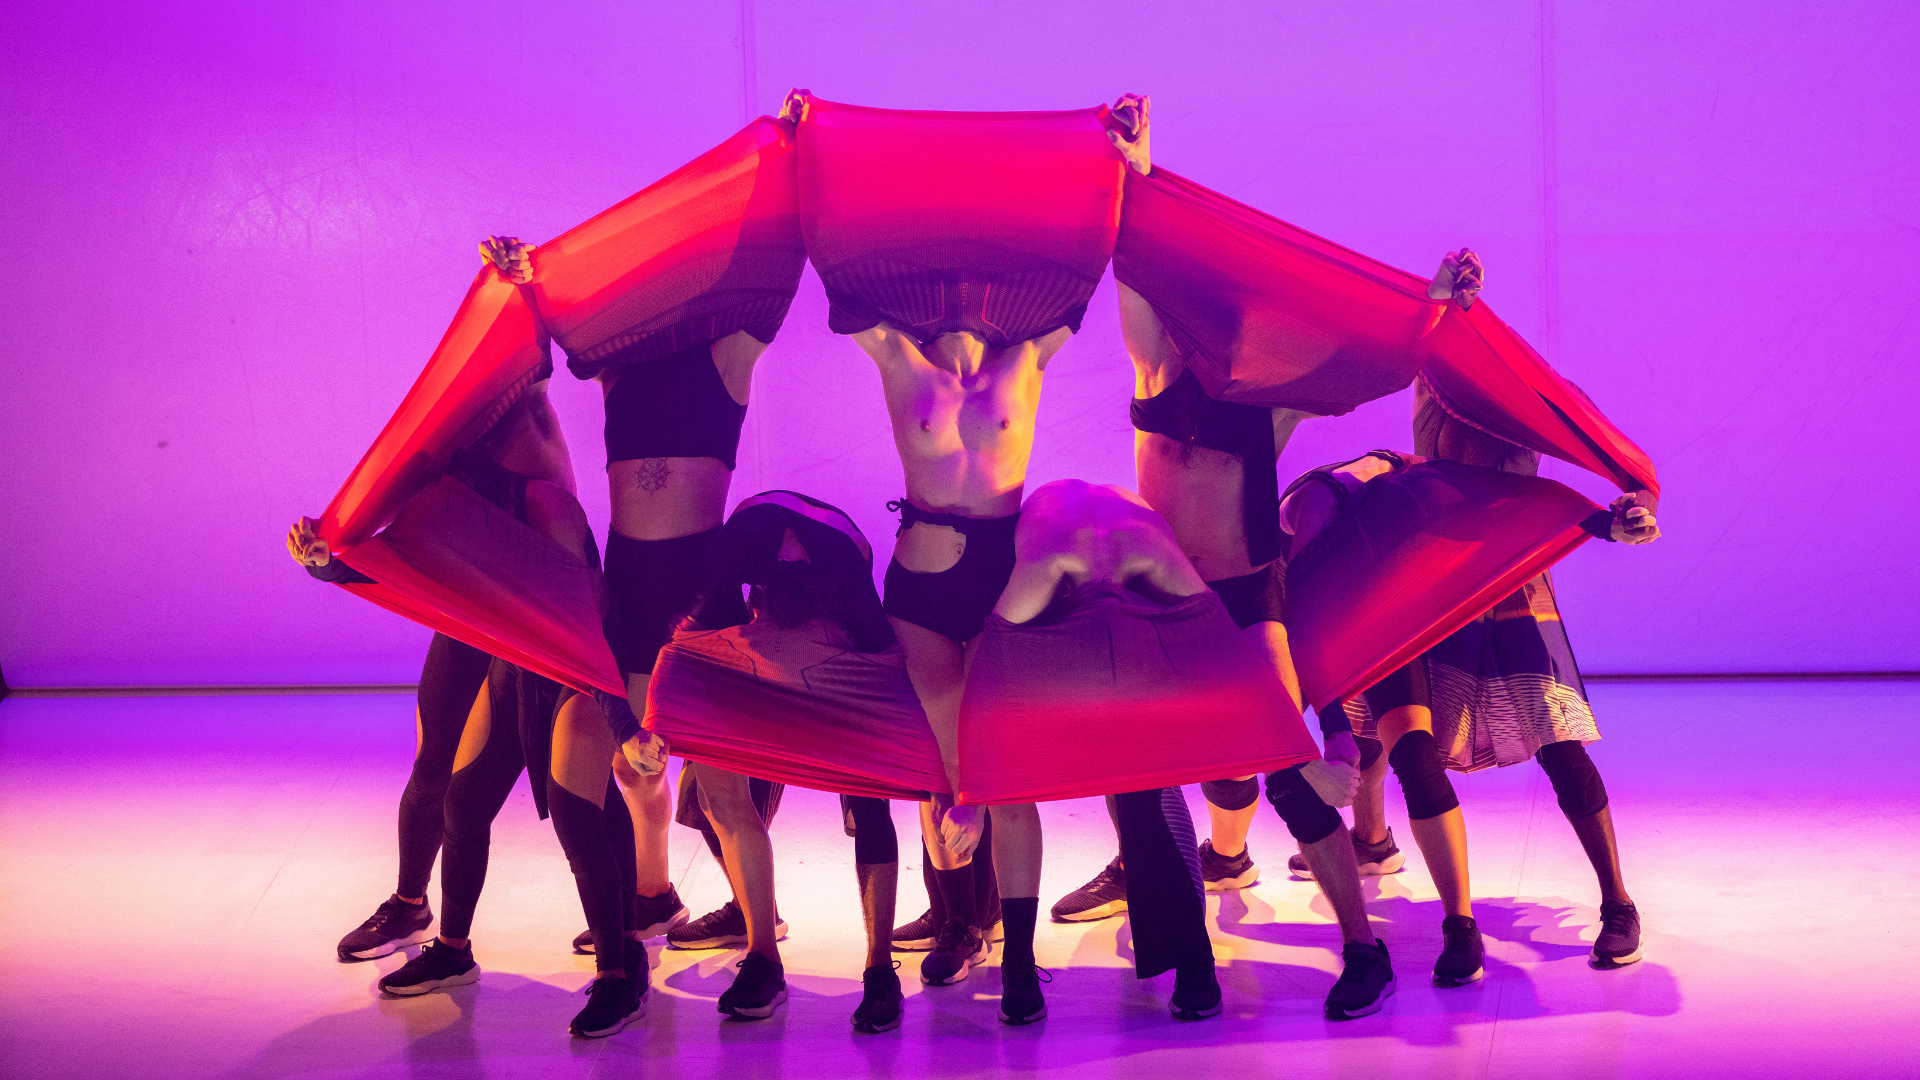 A group of dancers form a circle, each lifting a bright pink and purple jumper over their heads. With some standing and others bending low, the jumpers almost seem to form petals of a flower.